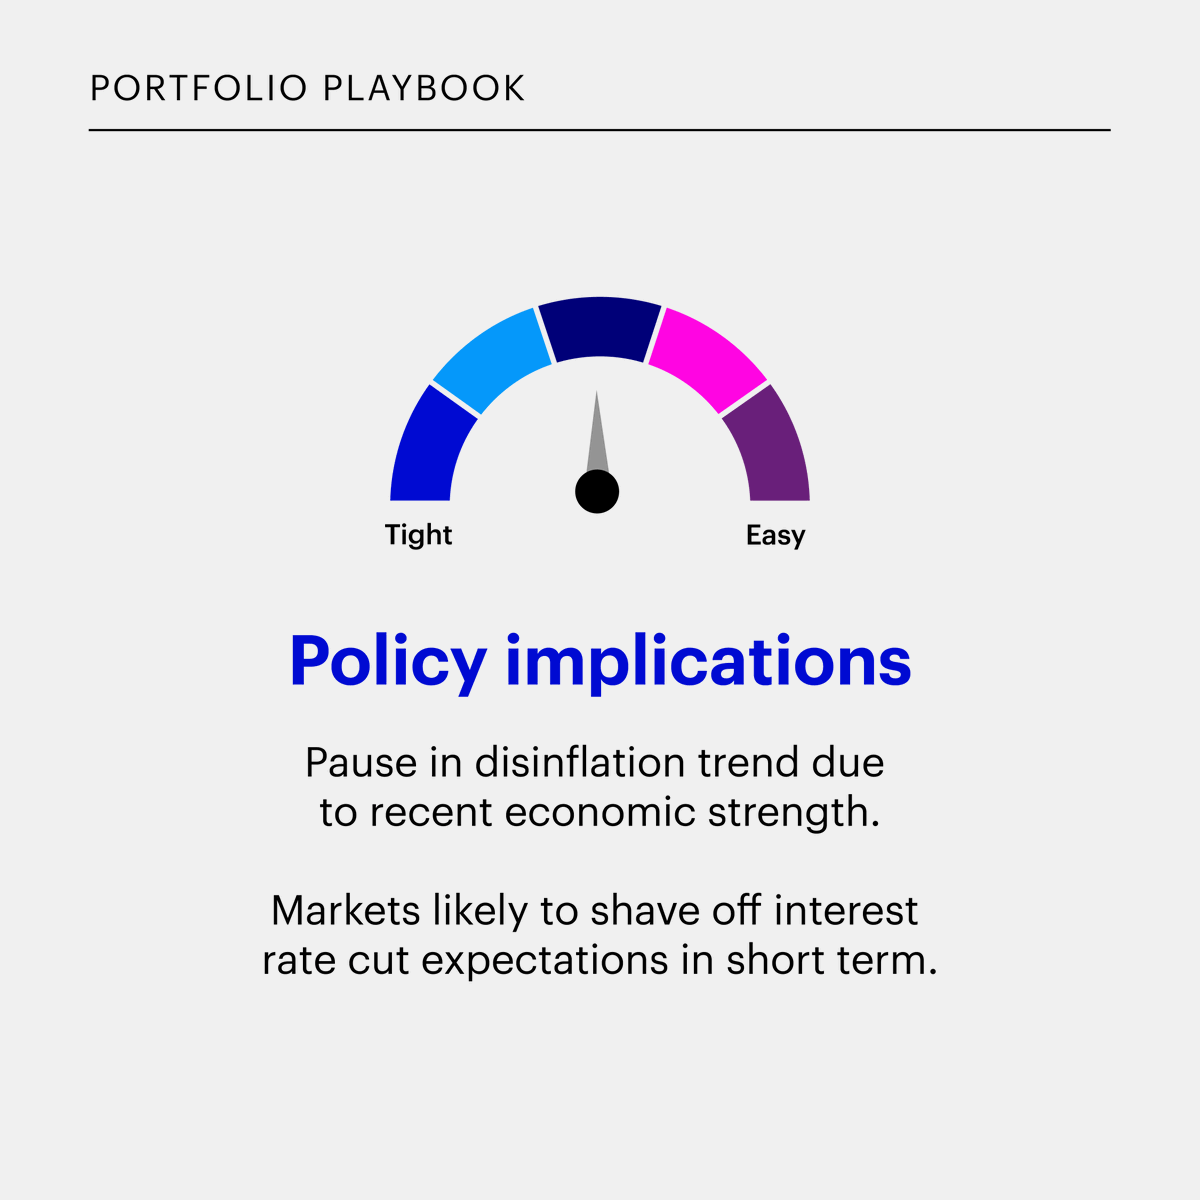 Markets turned pro-risk amid favorable earnings. From a tactical asset allocation standpoint, we’re overweight in equities over fixed income, favoring emerging markets, value, and smaller caps. Get our outlook and allocation guidance in Portfolio Playbook: inves.co/3VmFWv2